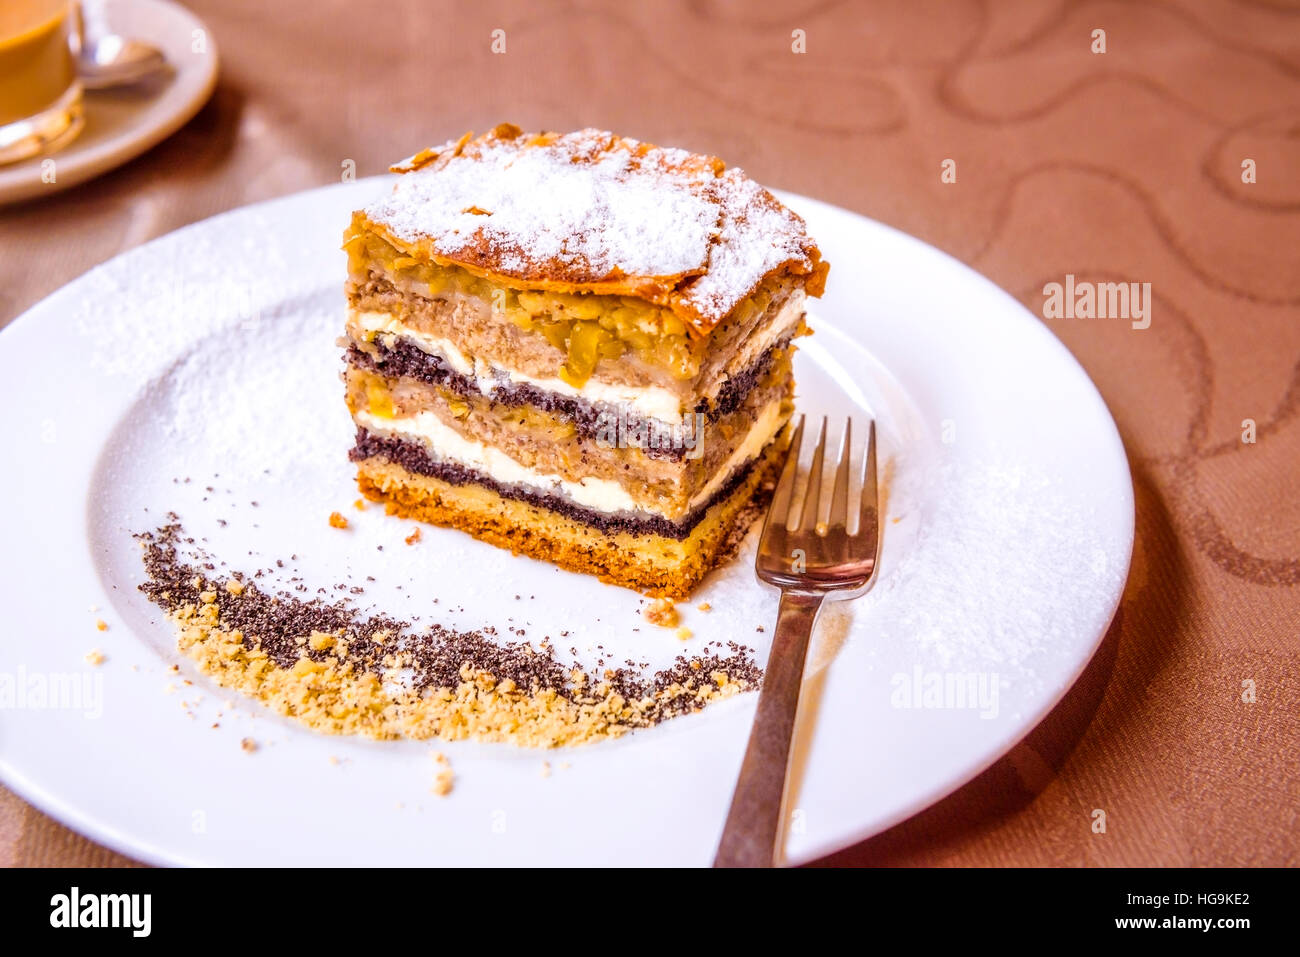 Exquisite sweet dessert, a traditional cake from Prekmurje with poppy seeds, nuts, cottage cheese and apple layers, called Prekmurska gibanica. Stock Photo